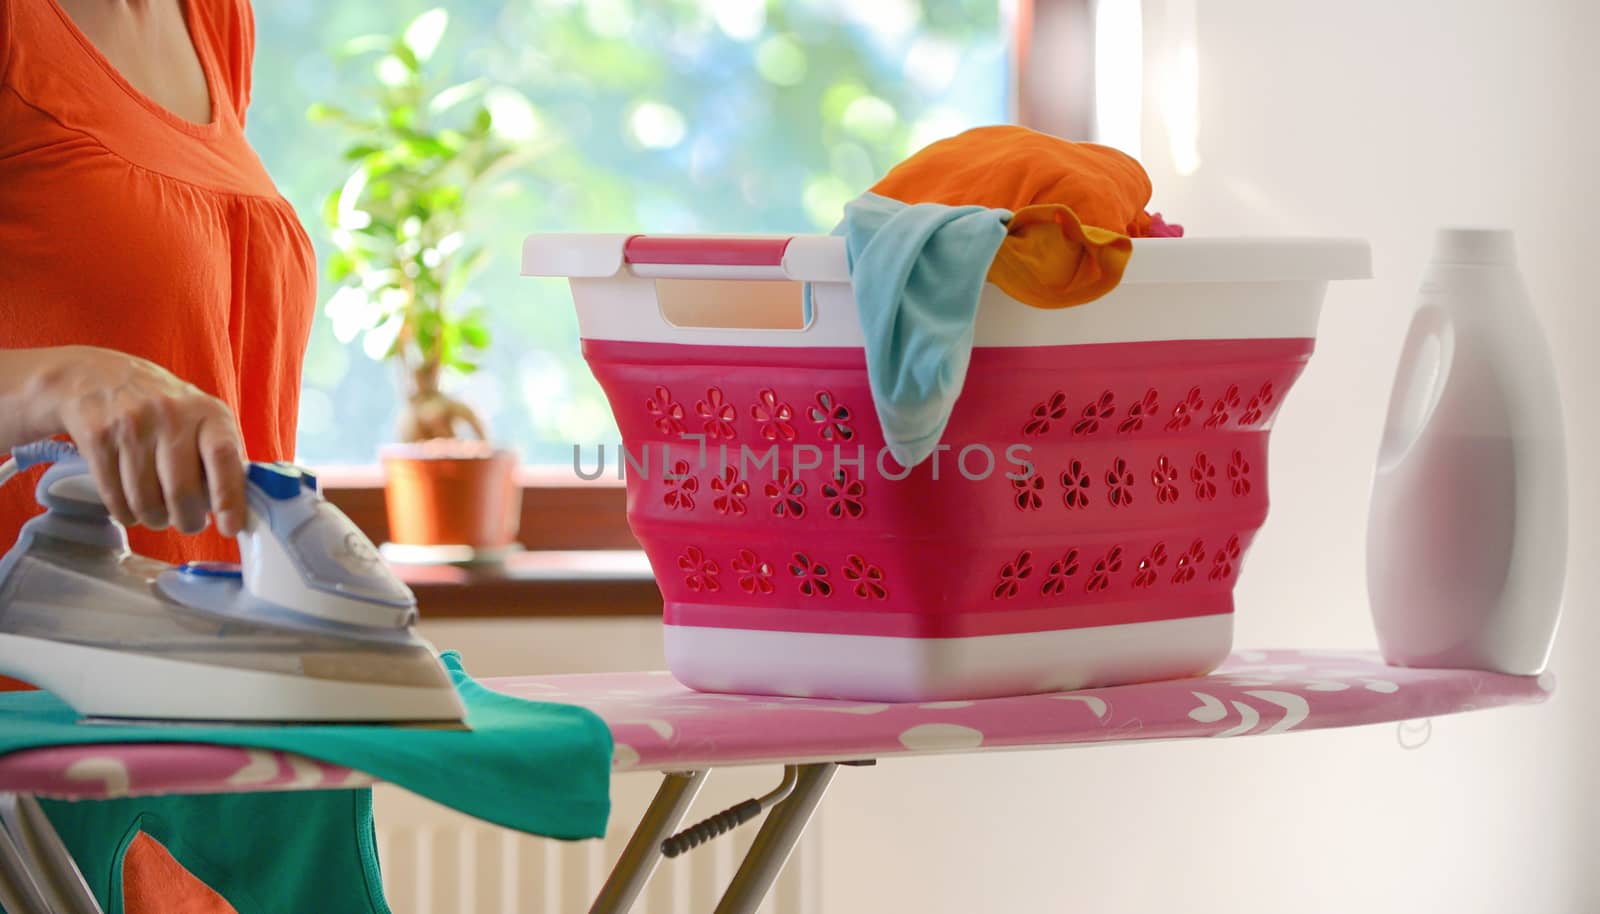 Collapsible Laundry Basket by mady70